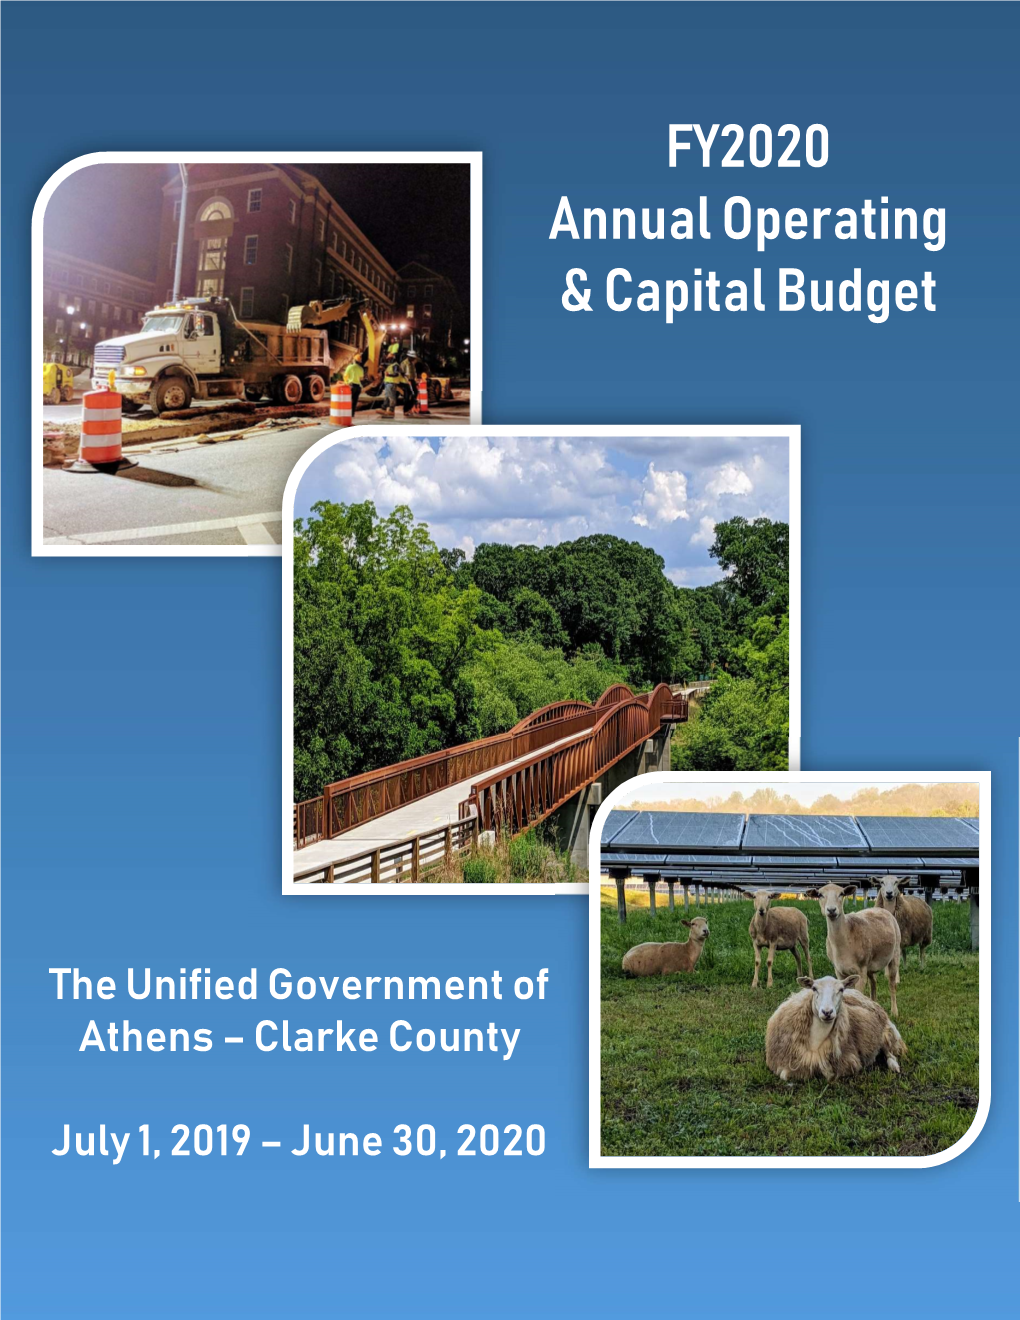 FY2020 Annual Operating & Capital Budget